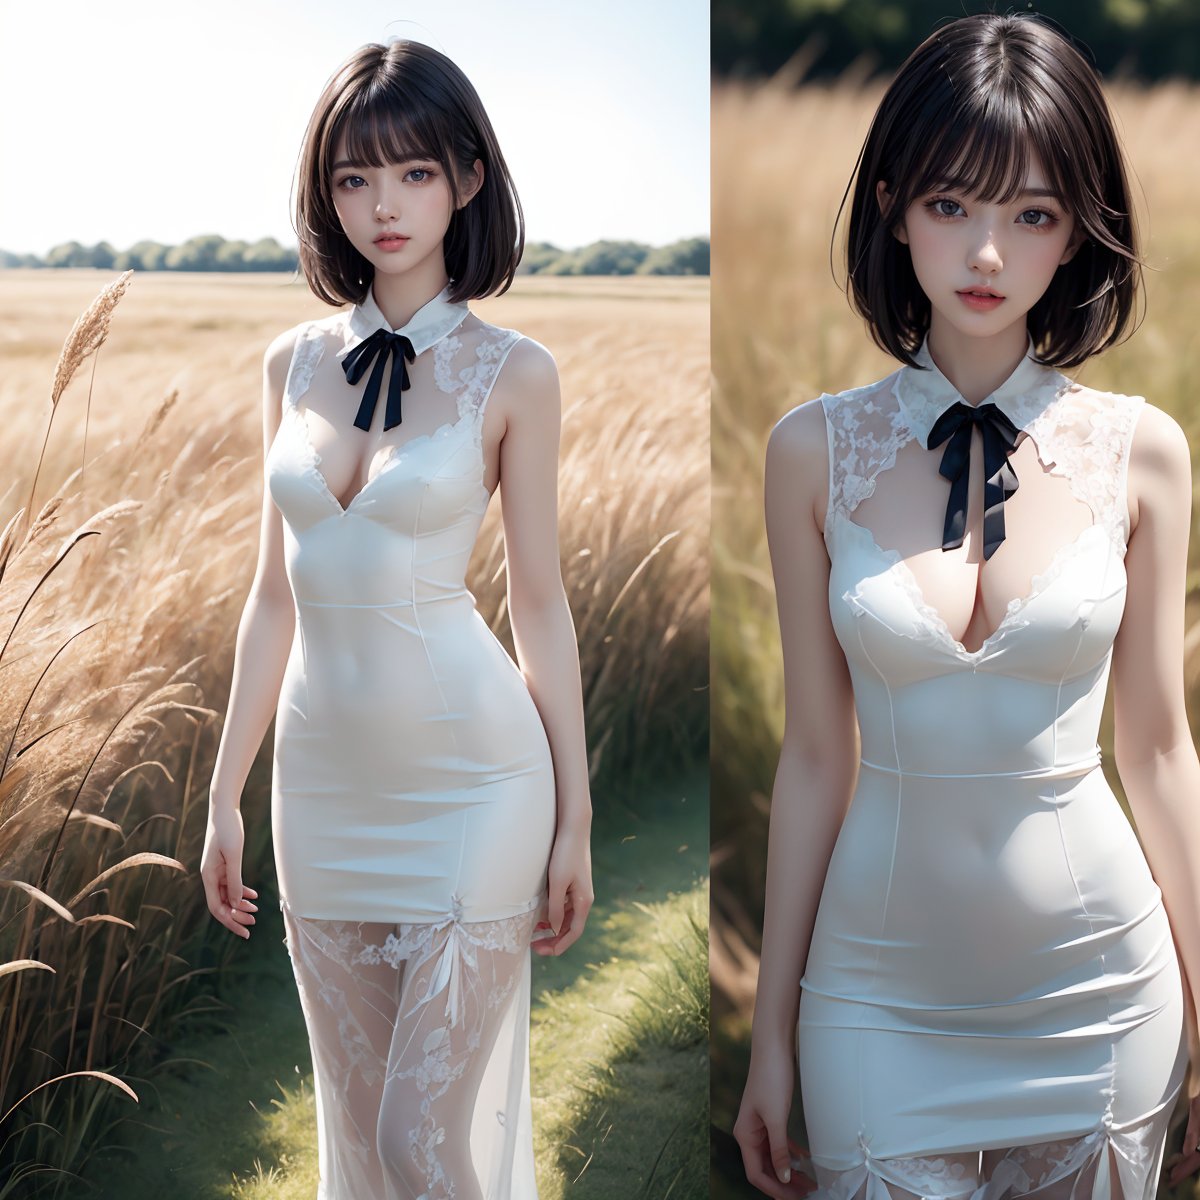 This captivating and visually stunning fractal art depicts a woman. The official art gives her a strong aesthetic appeal. 4K high resolution rendering. 19 year old Japanese female. Straight short black hair with bangs. Dark eyes, short eyelashes, small breasts.
White long dress. Collared dress. Grass field. Standing.
Full shot. 1 girl. Japanese girl.